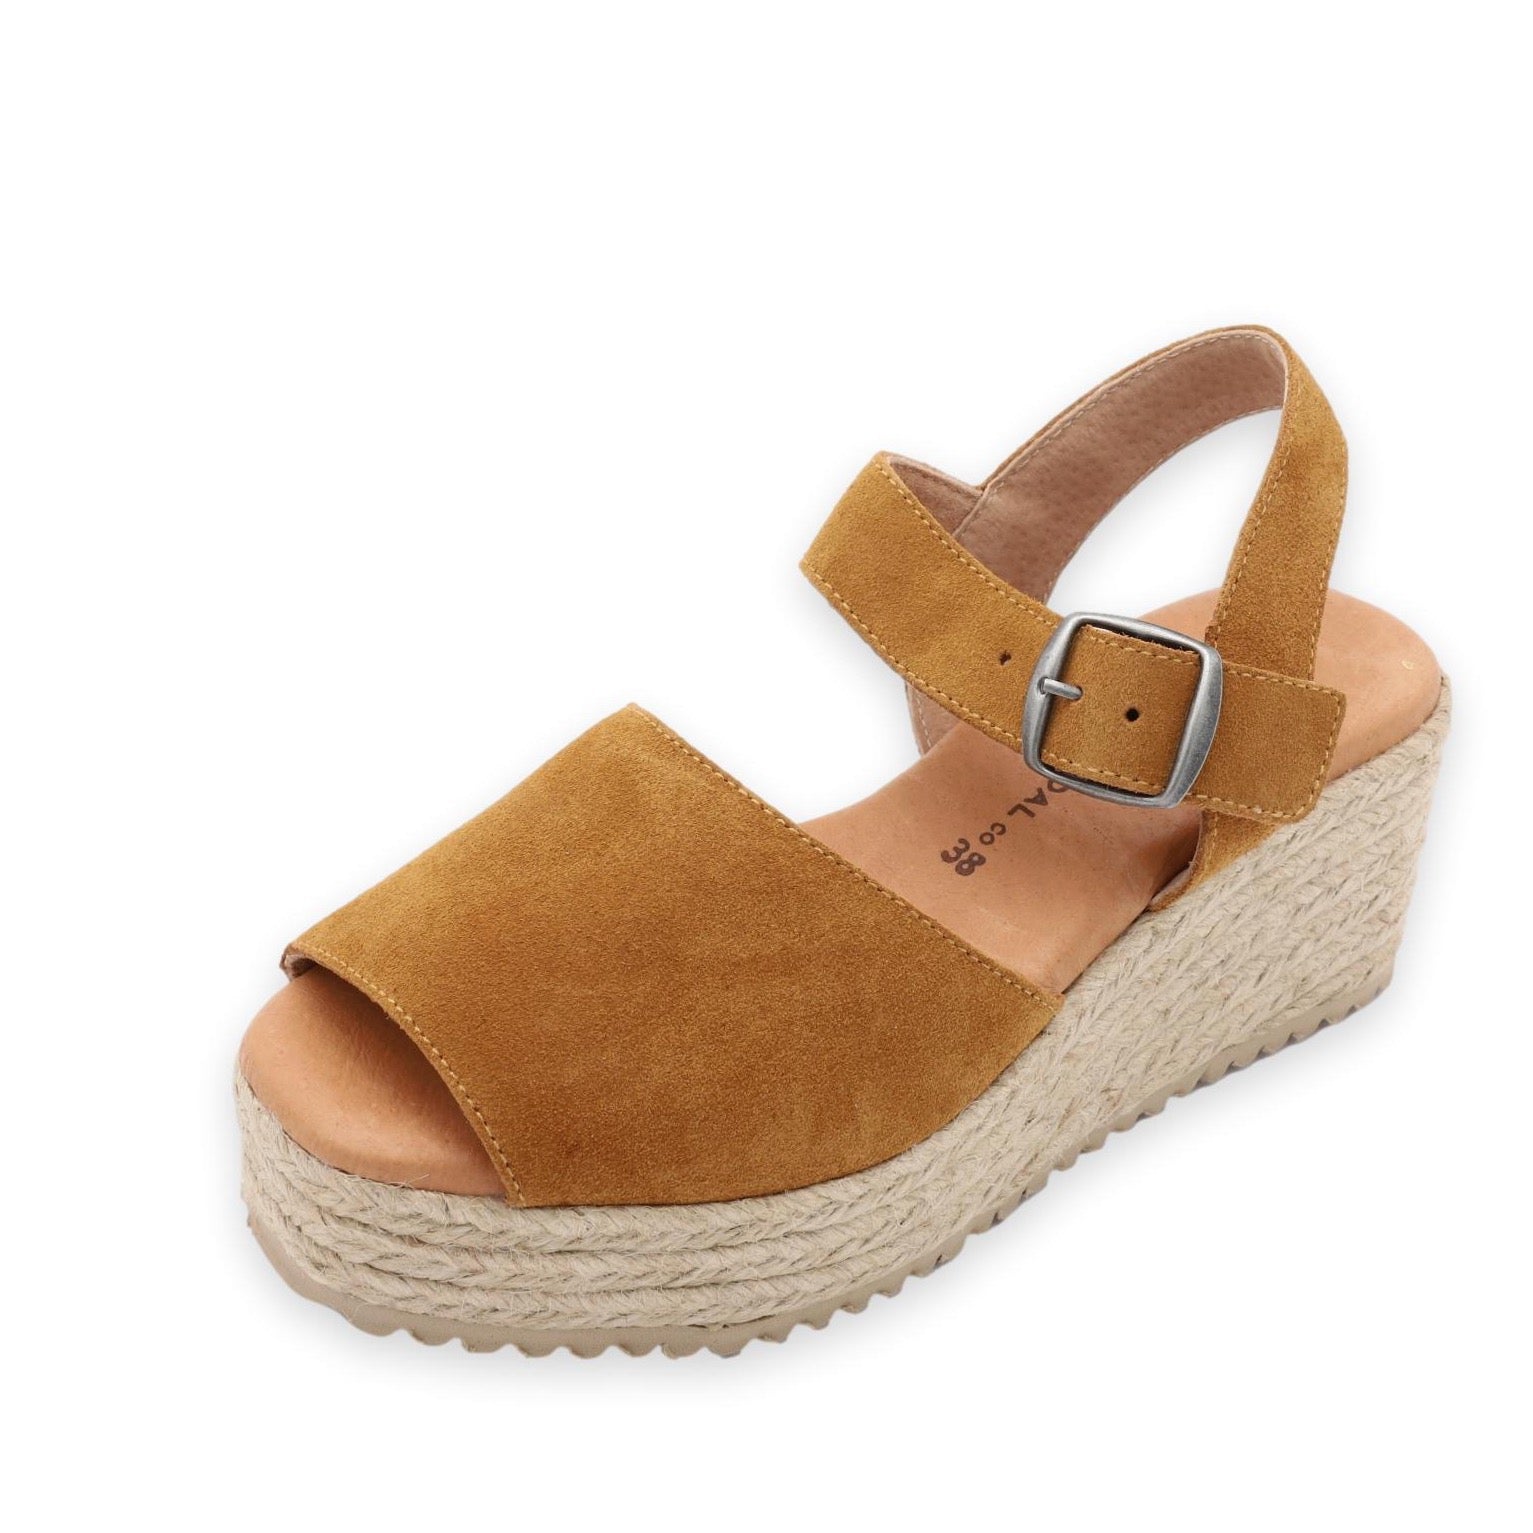 angle view of platform sandals in whiskey color